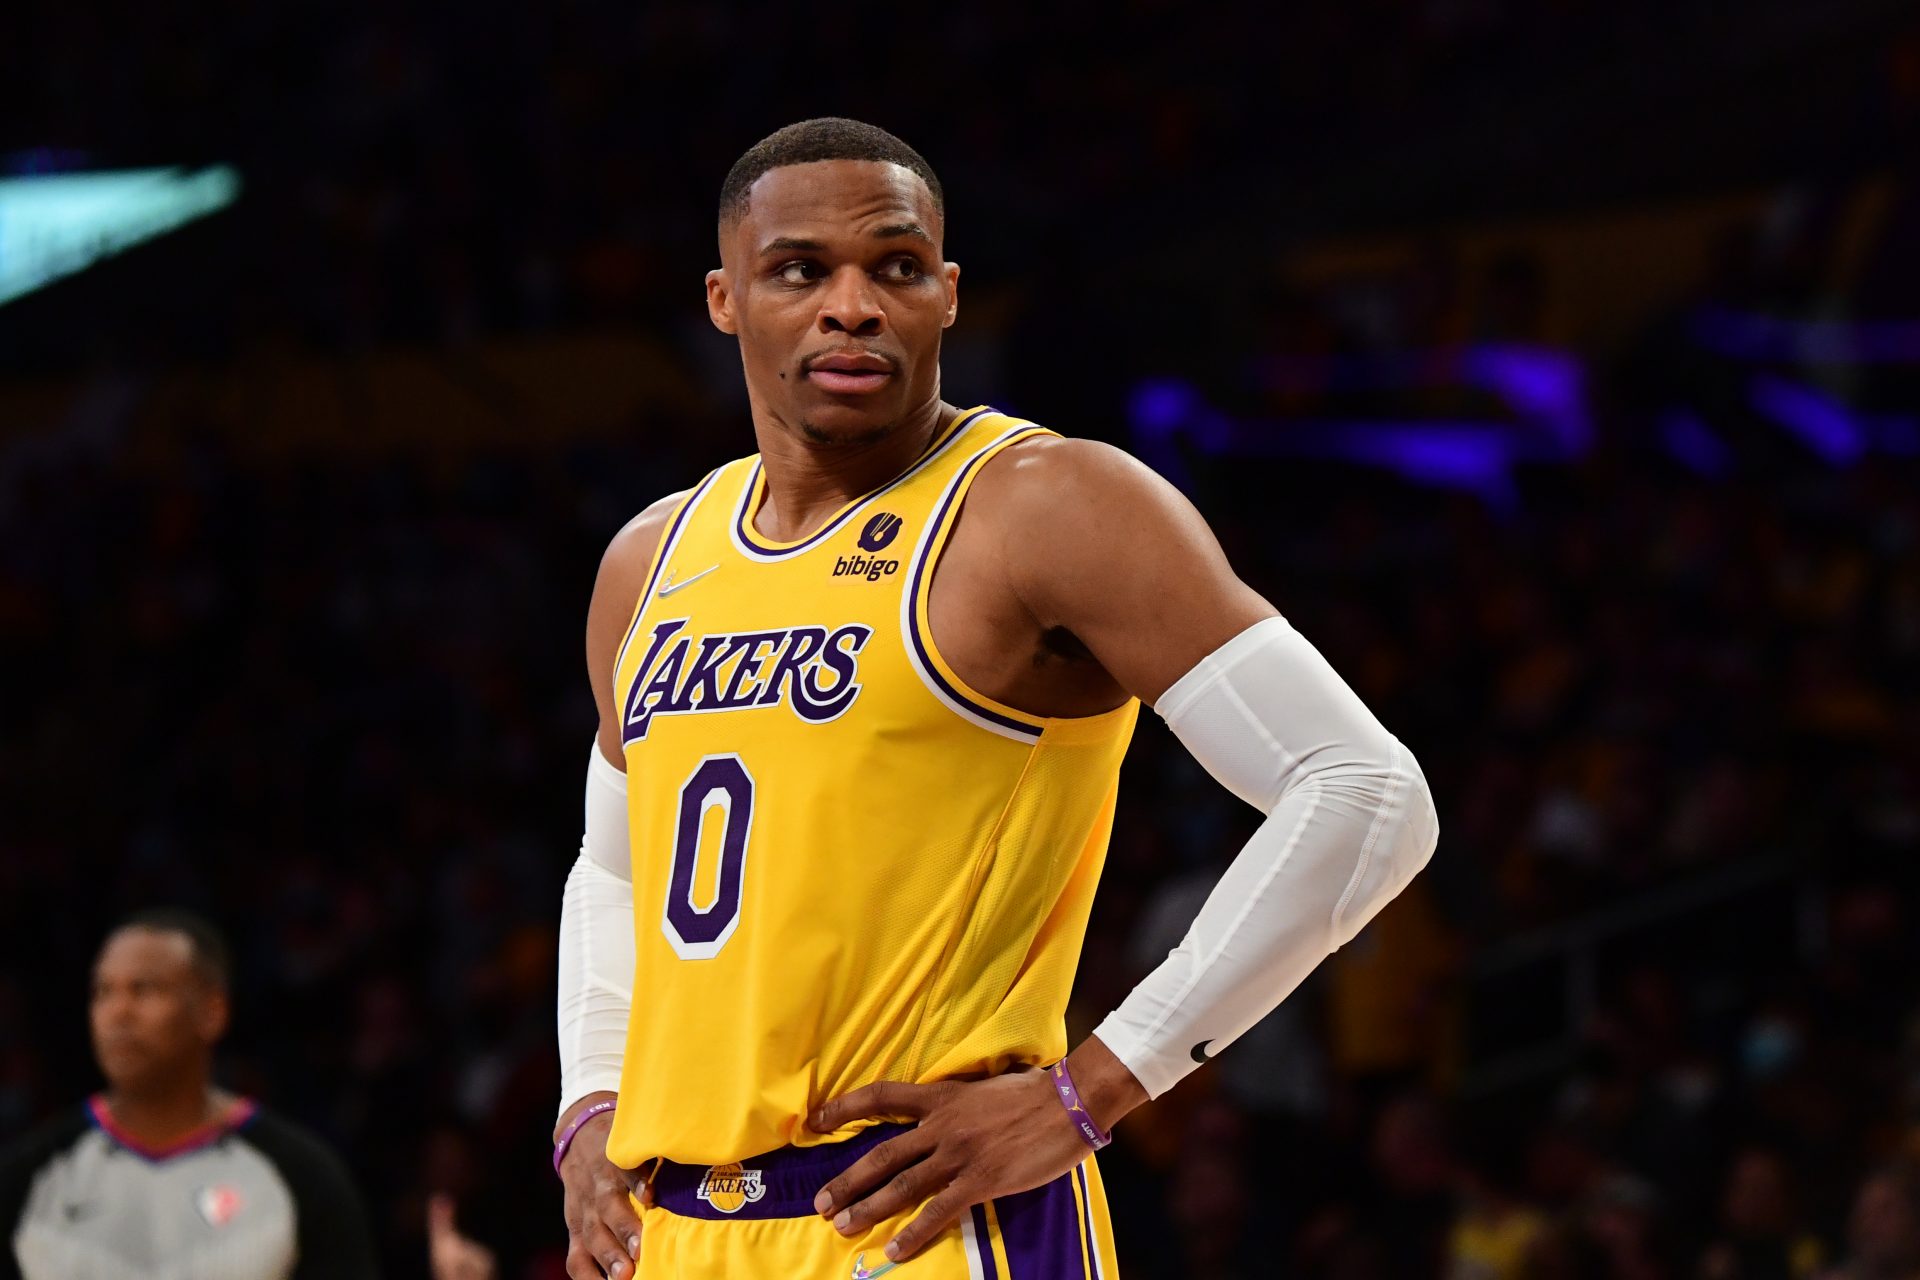 Lakers’ Frank Vogel Takes Blame for Russell Westbrook’s Struggles vs. Warriors